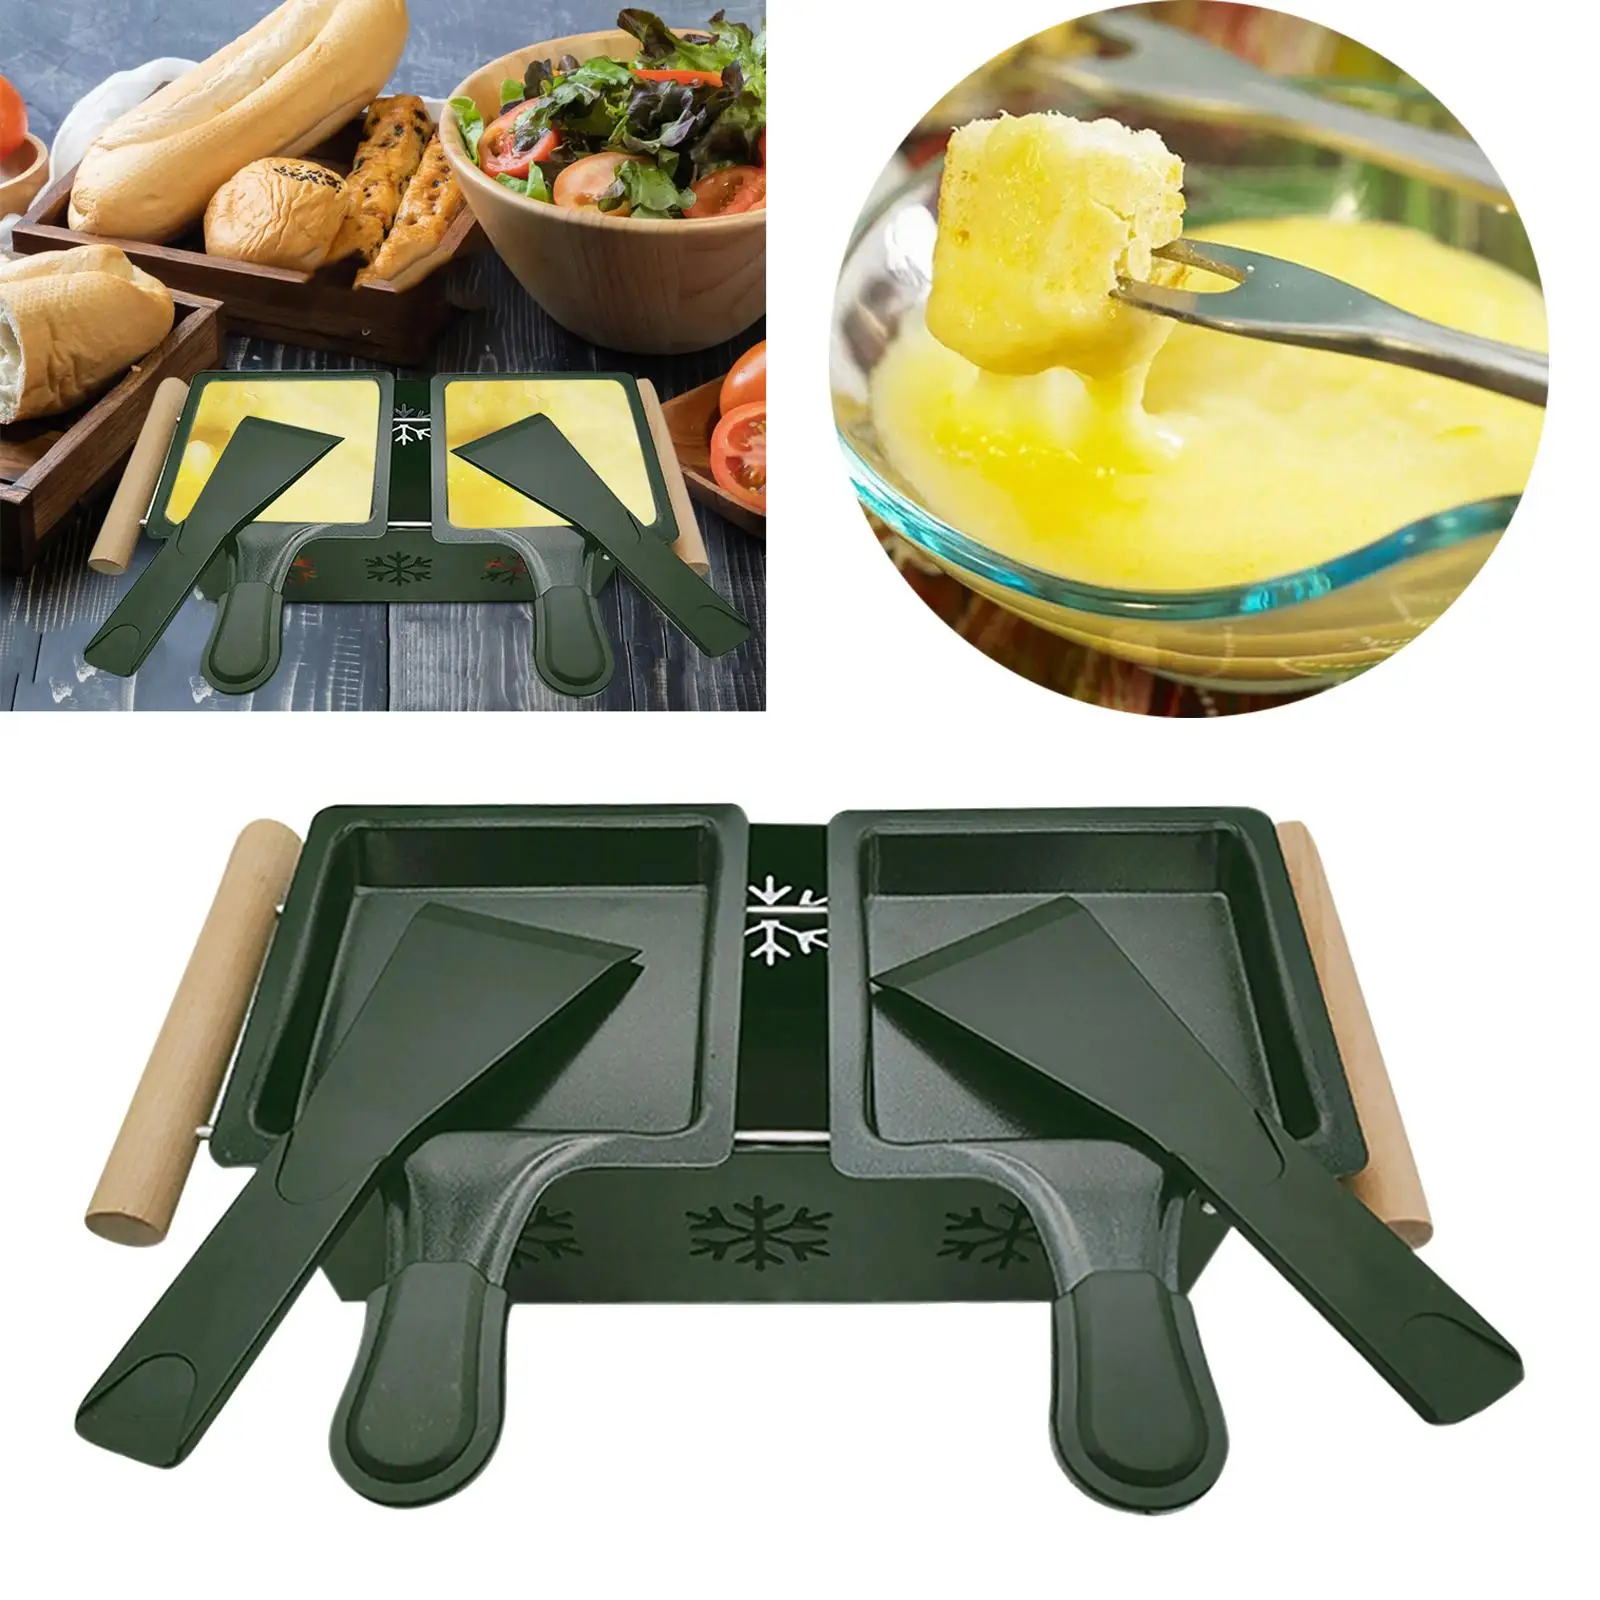 Mini Cheese Melter Pan Set Cheese Raclette Grilling Tool Foldable Handle